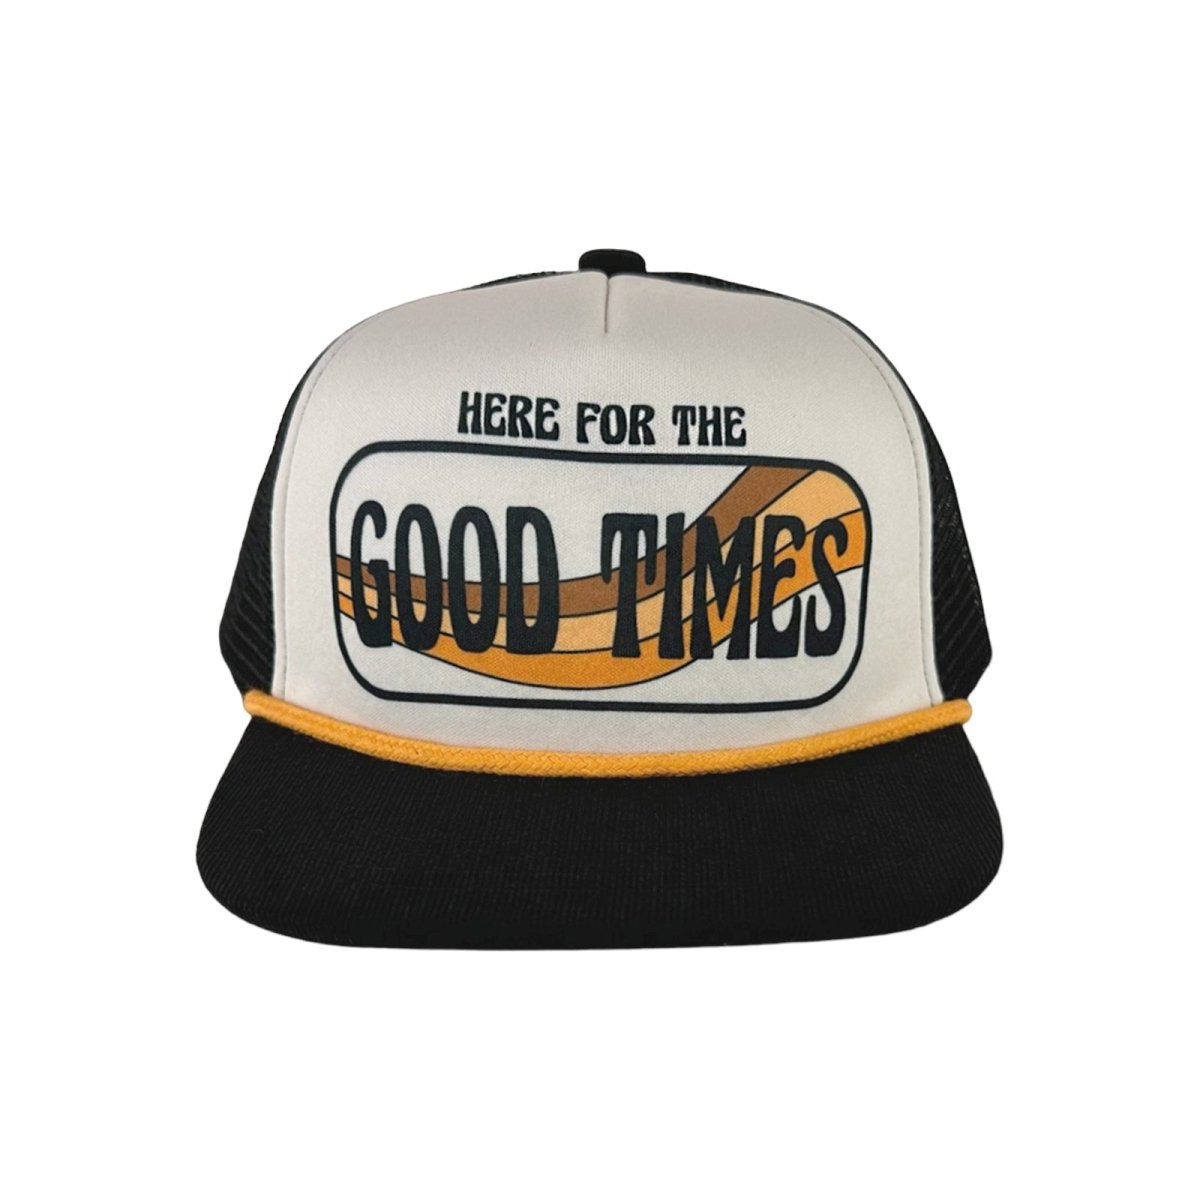 GOOD TIMES TRUCKER HAT - TINY WHALES